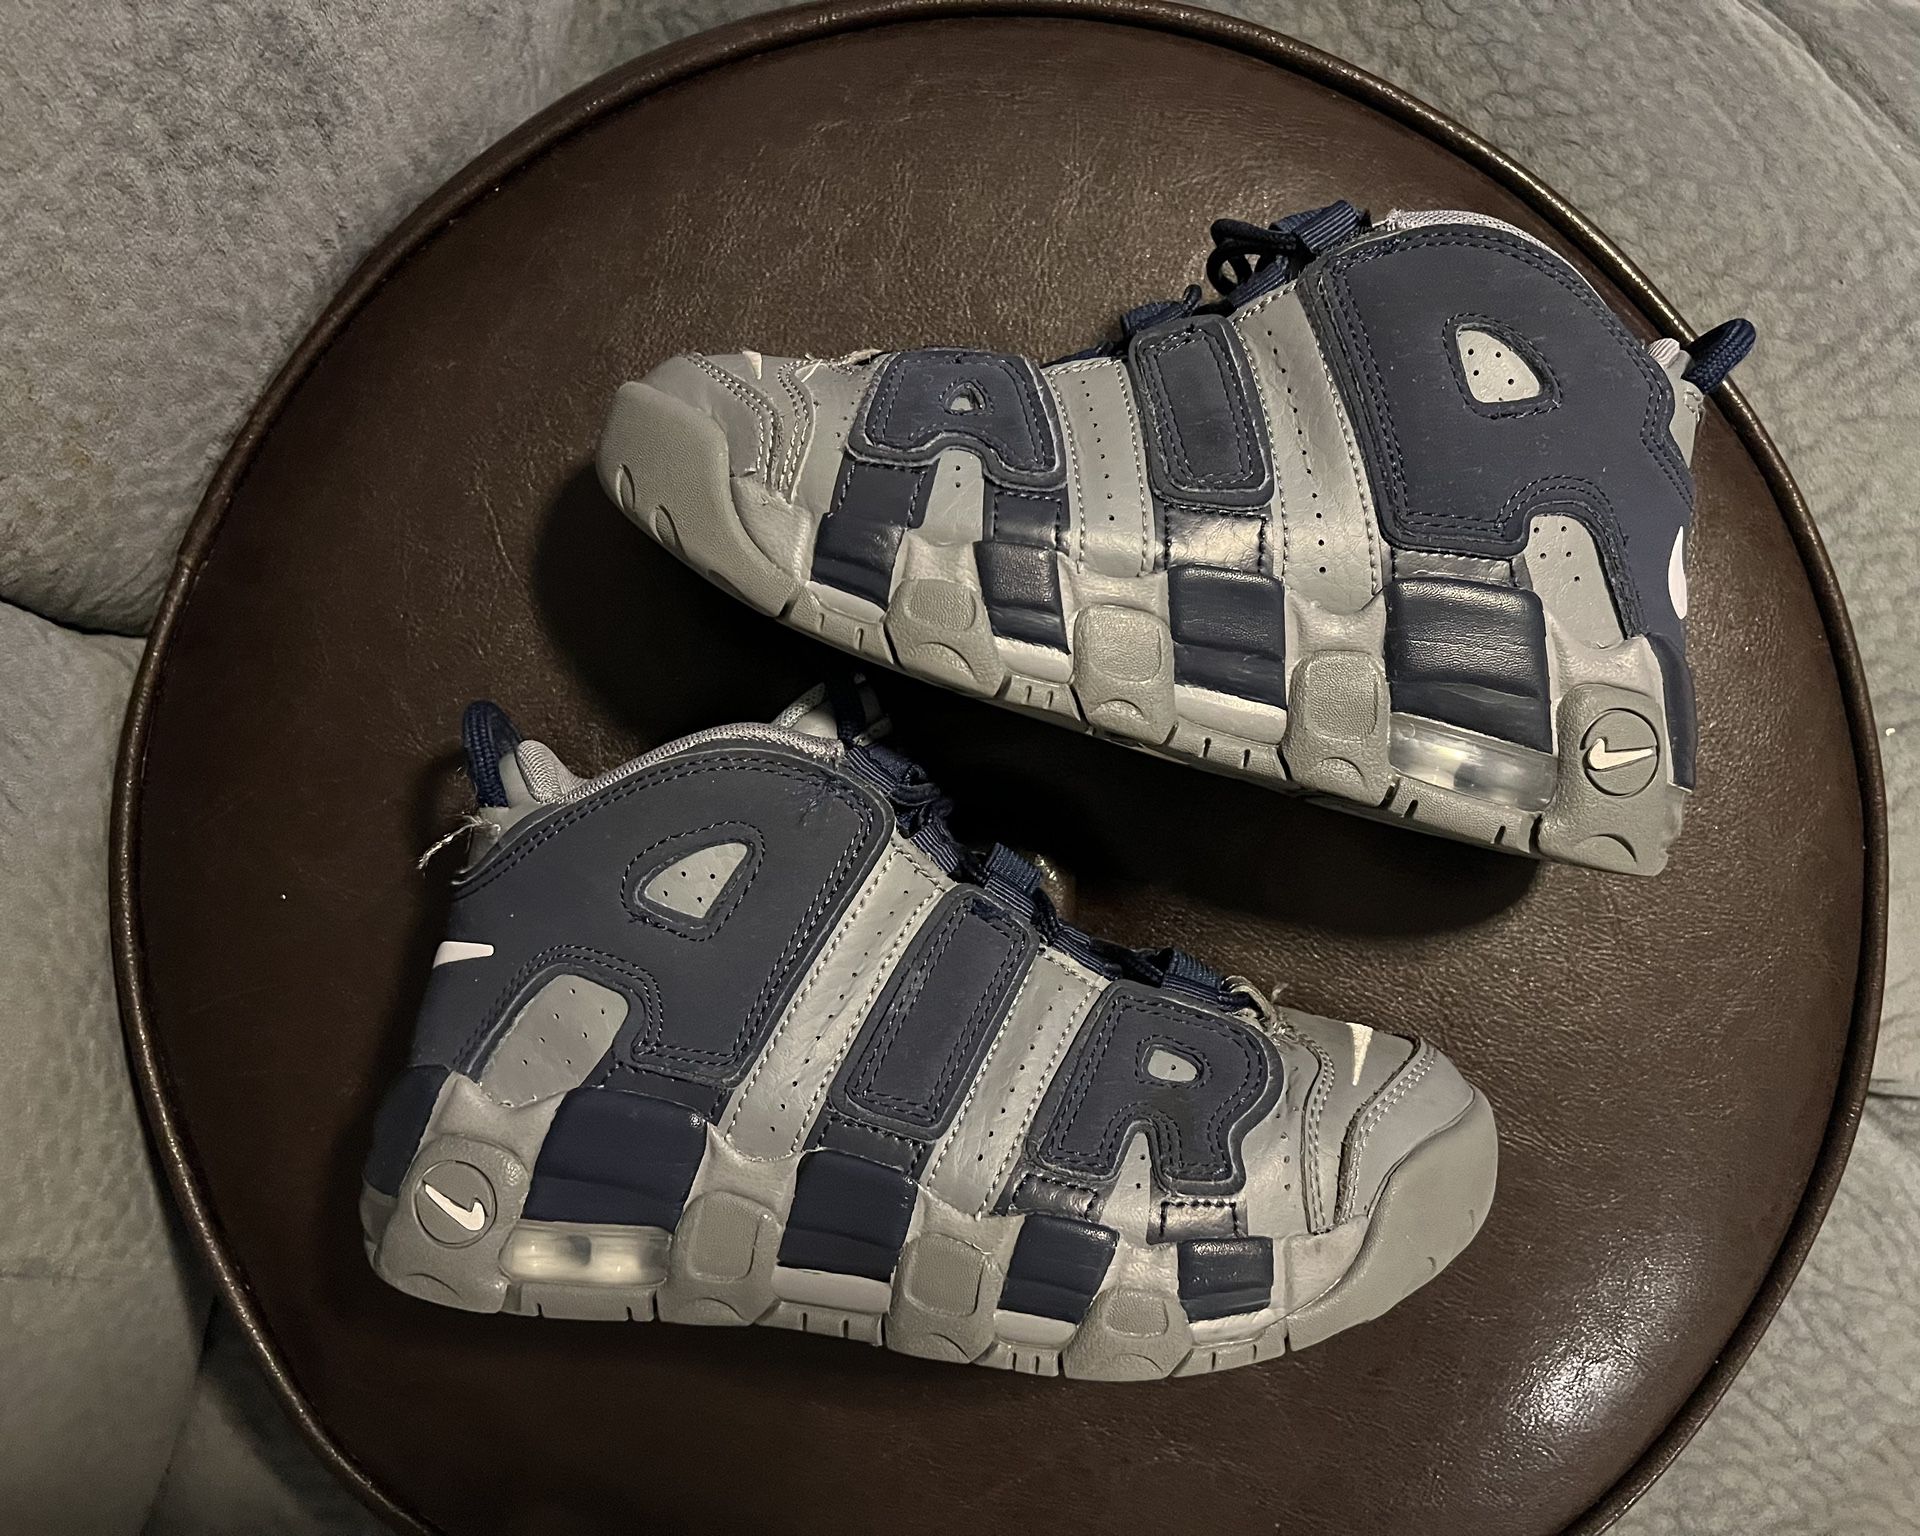 NIKE AIR MORE UPTEMPO/ COOL GREY/MIDNIGHT NAVY-WHITE size 3y